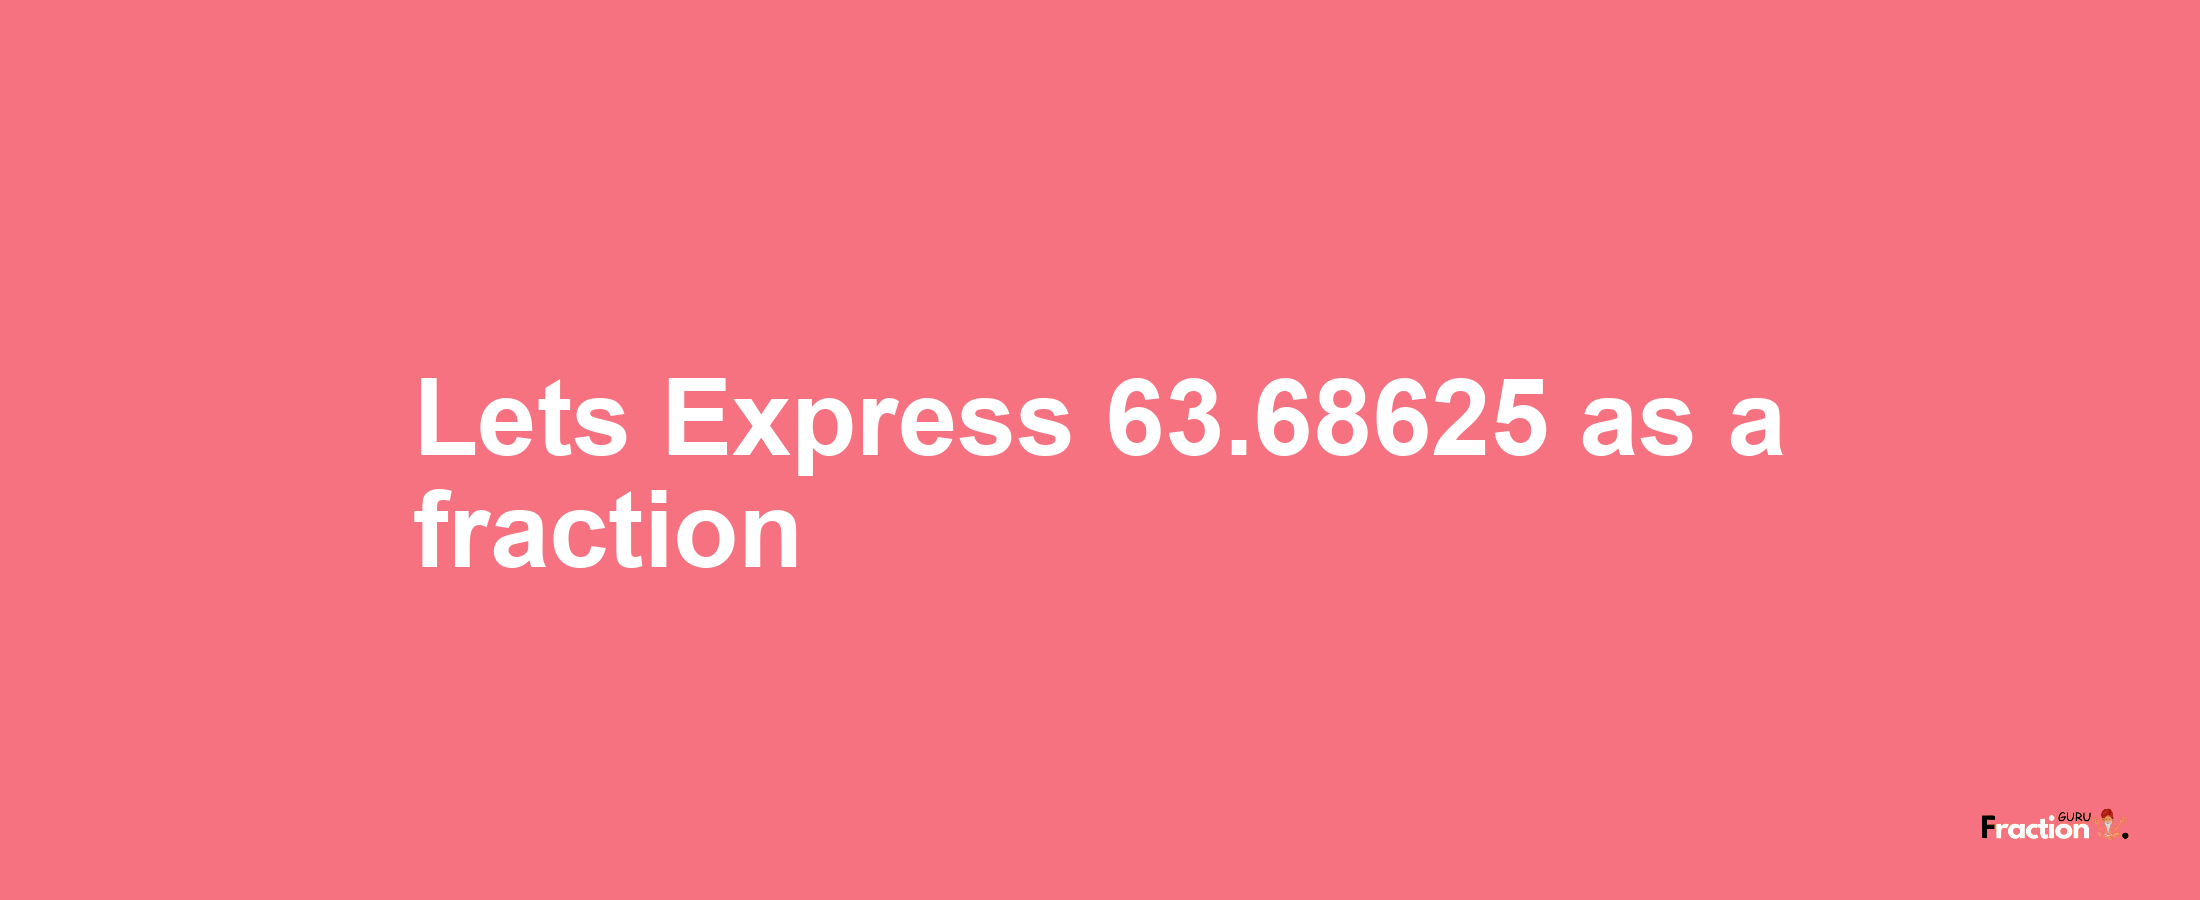 Lets Express 63.68625 as afraction